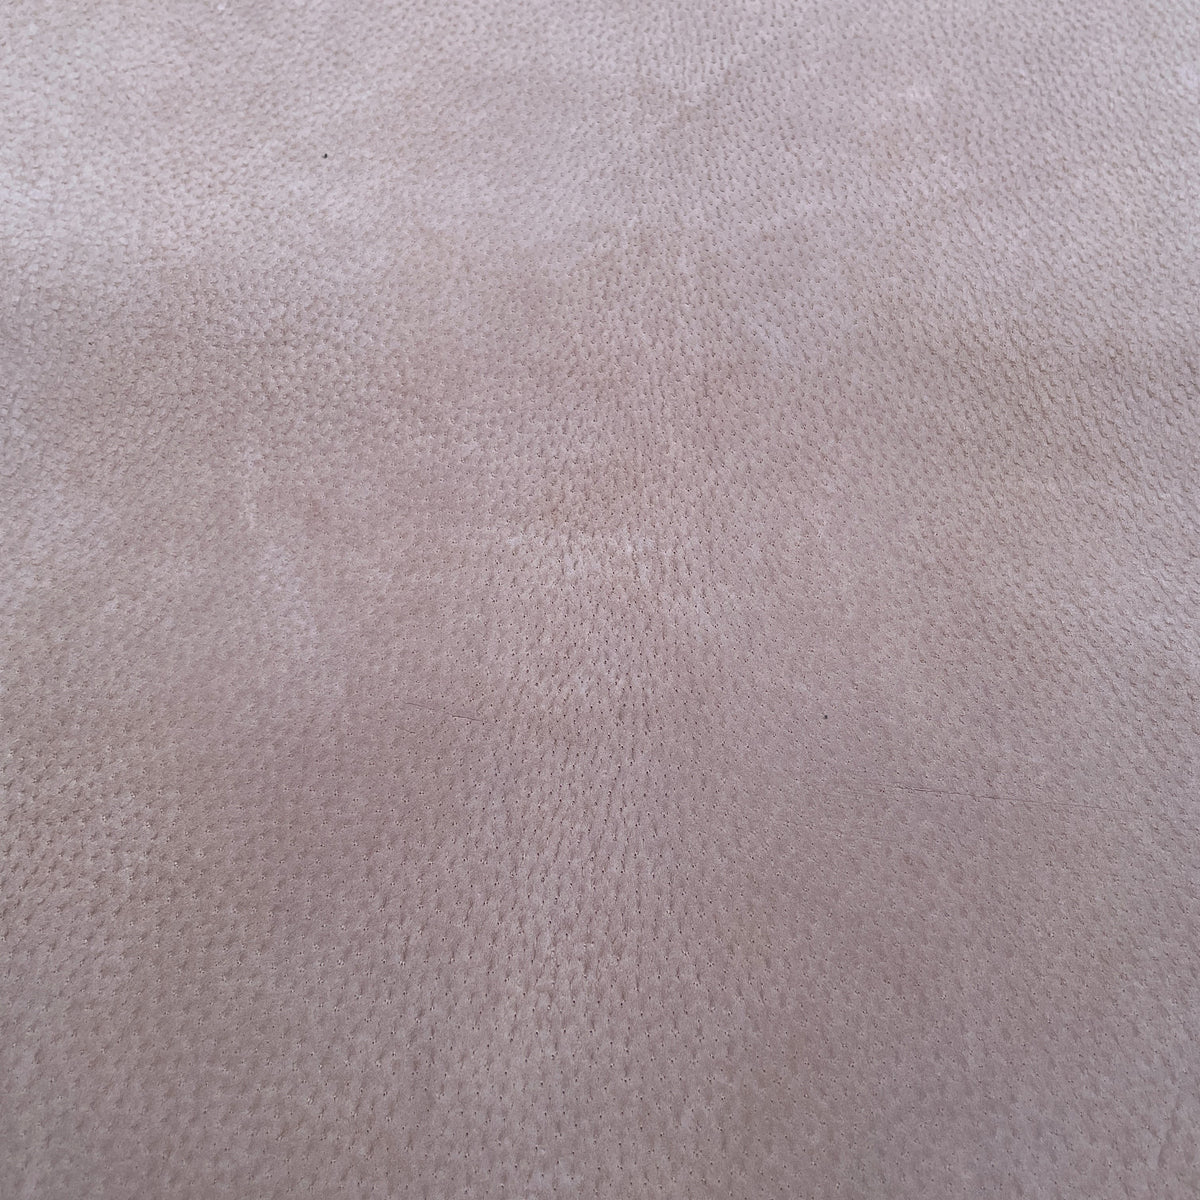 Pig Skin Suede | Sand | 0.6 mm | 8 sq.ft | From $25 ea.